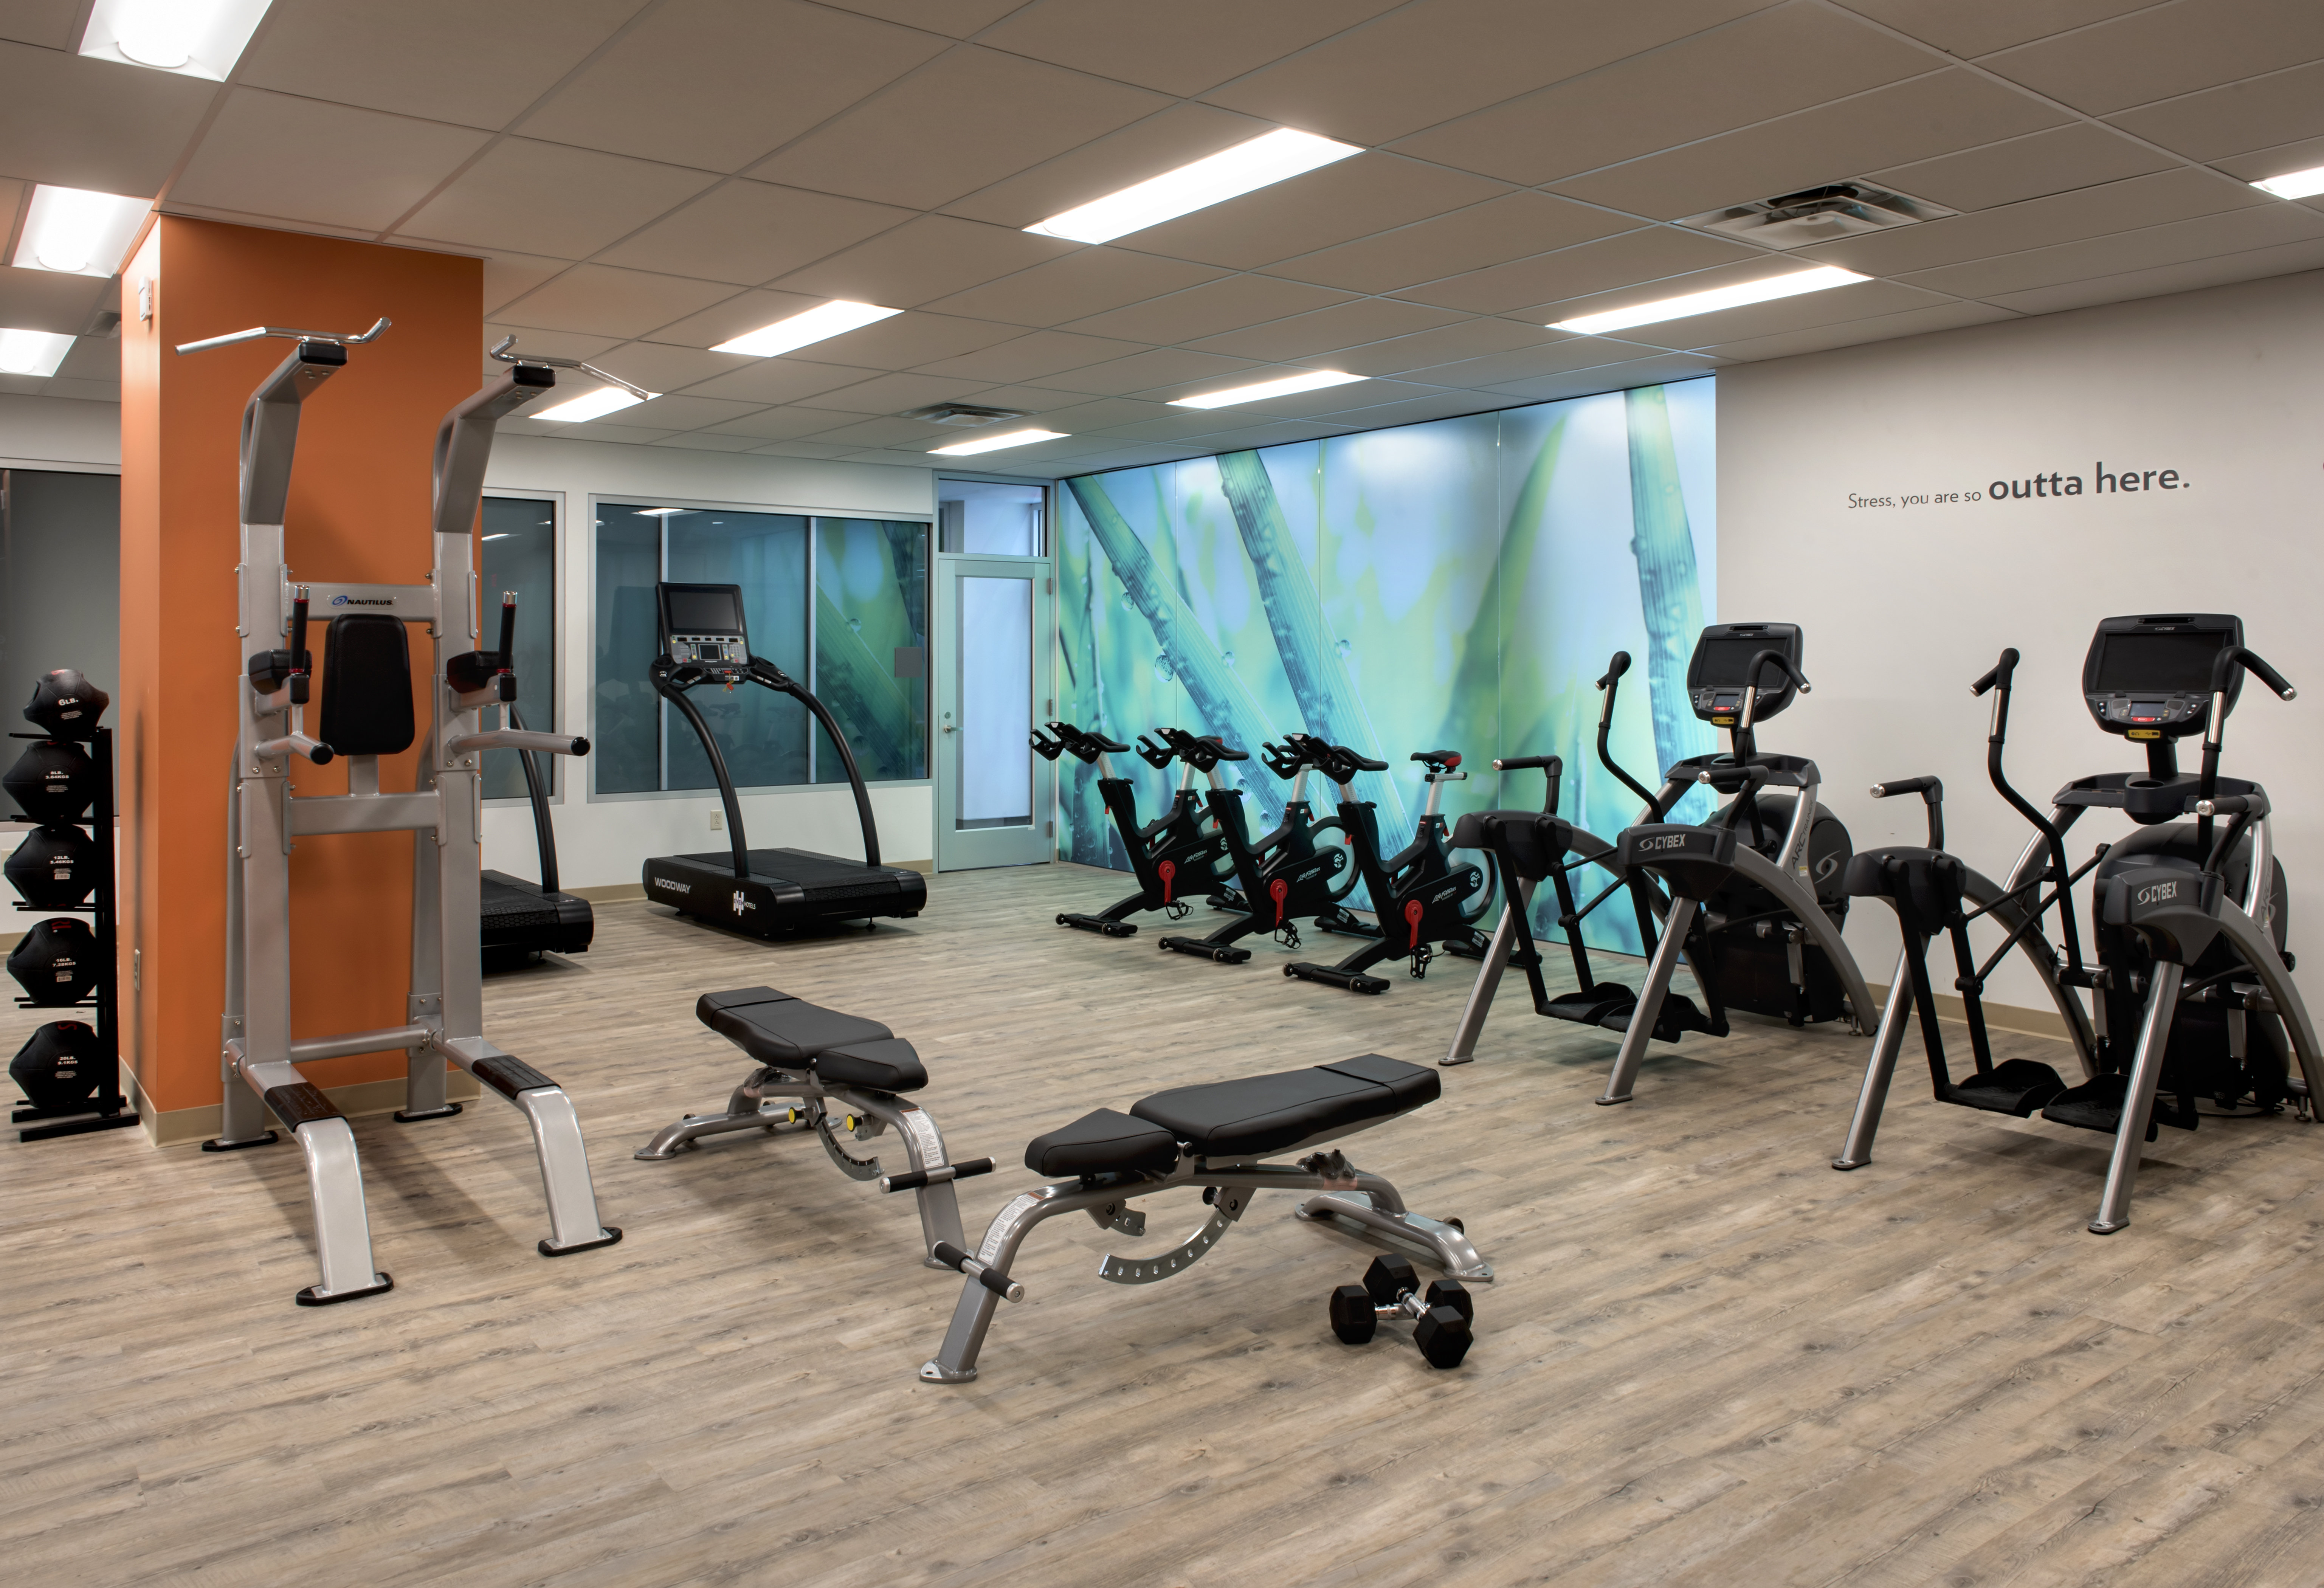 Maintain your gym routine at our state-of-the-art fitness studio.